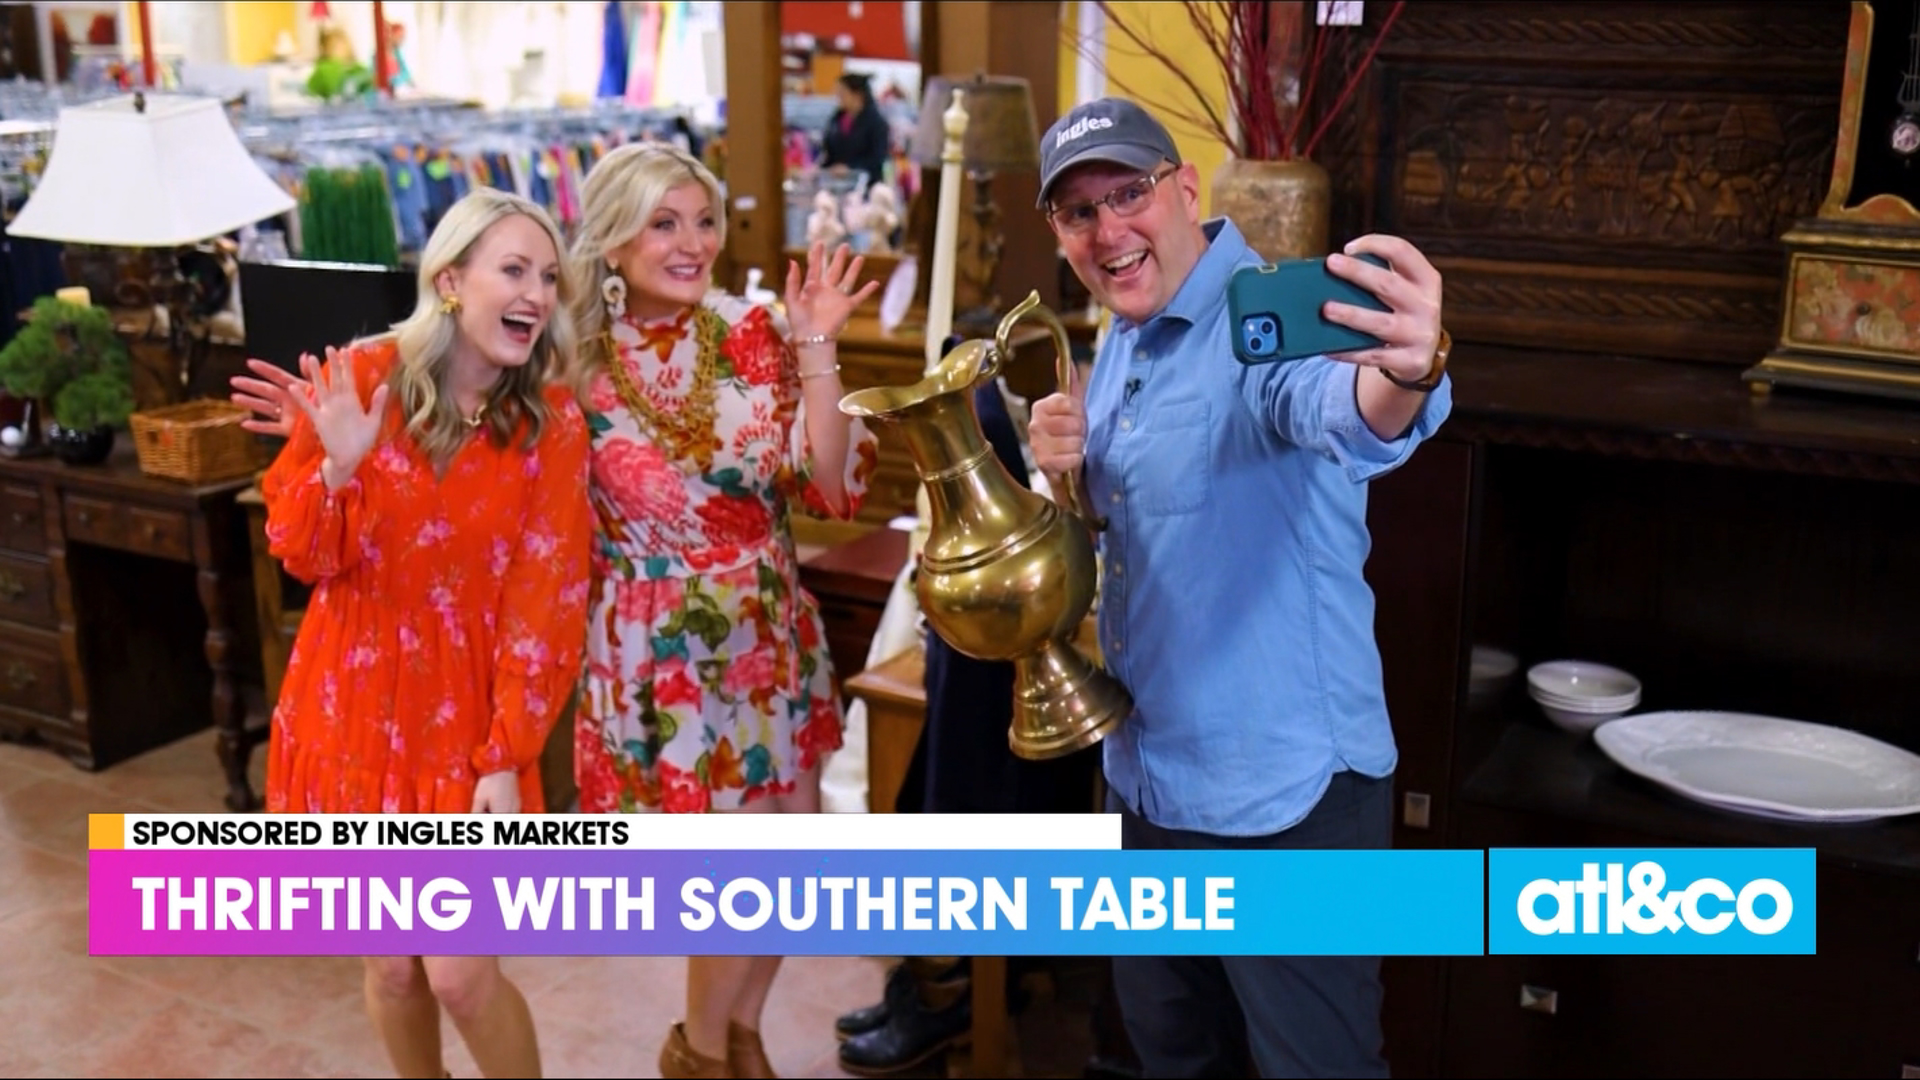 Let's go on a thrifting expedition with Erin Barnett and Kelli Smith from The Southern Table, presented by Ingles Markets.